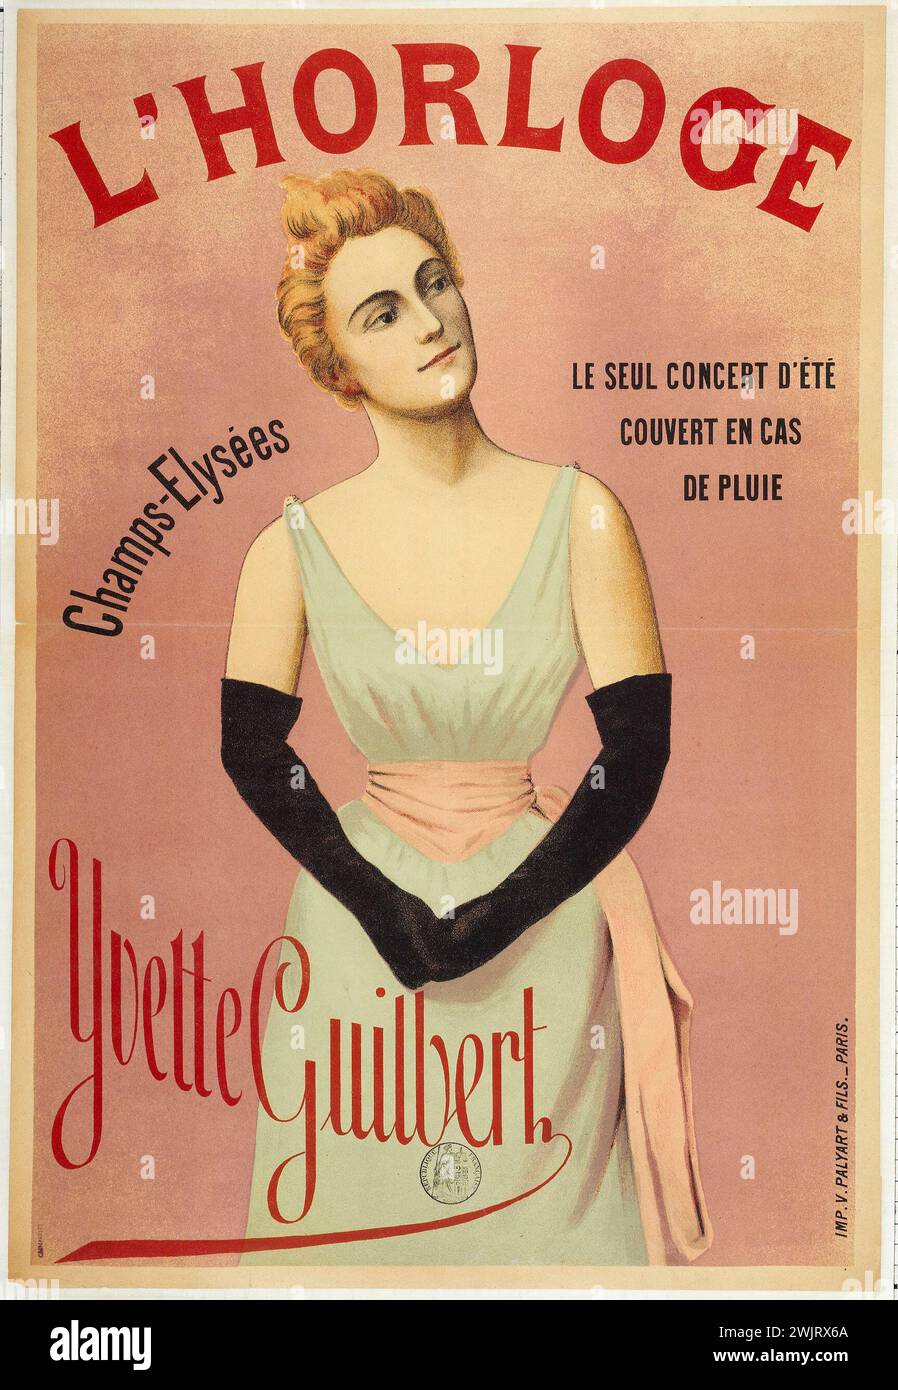 Imprimerie Victor Palyart. The clock, Yvette Guilbert. Poster. Color lithography. Paris, Carnavalet museum. Advertising poster, singer, French, newspaper, clock, color lithography, advertising Stock Photo